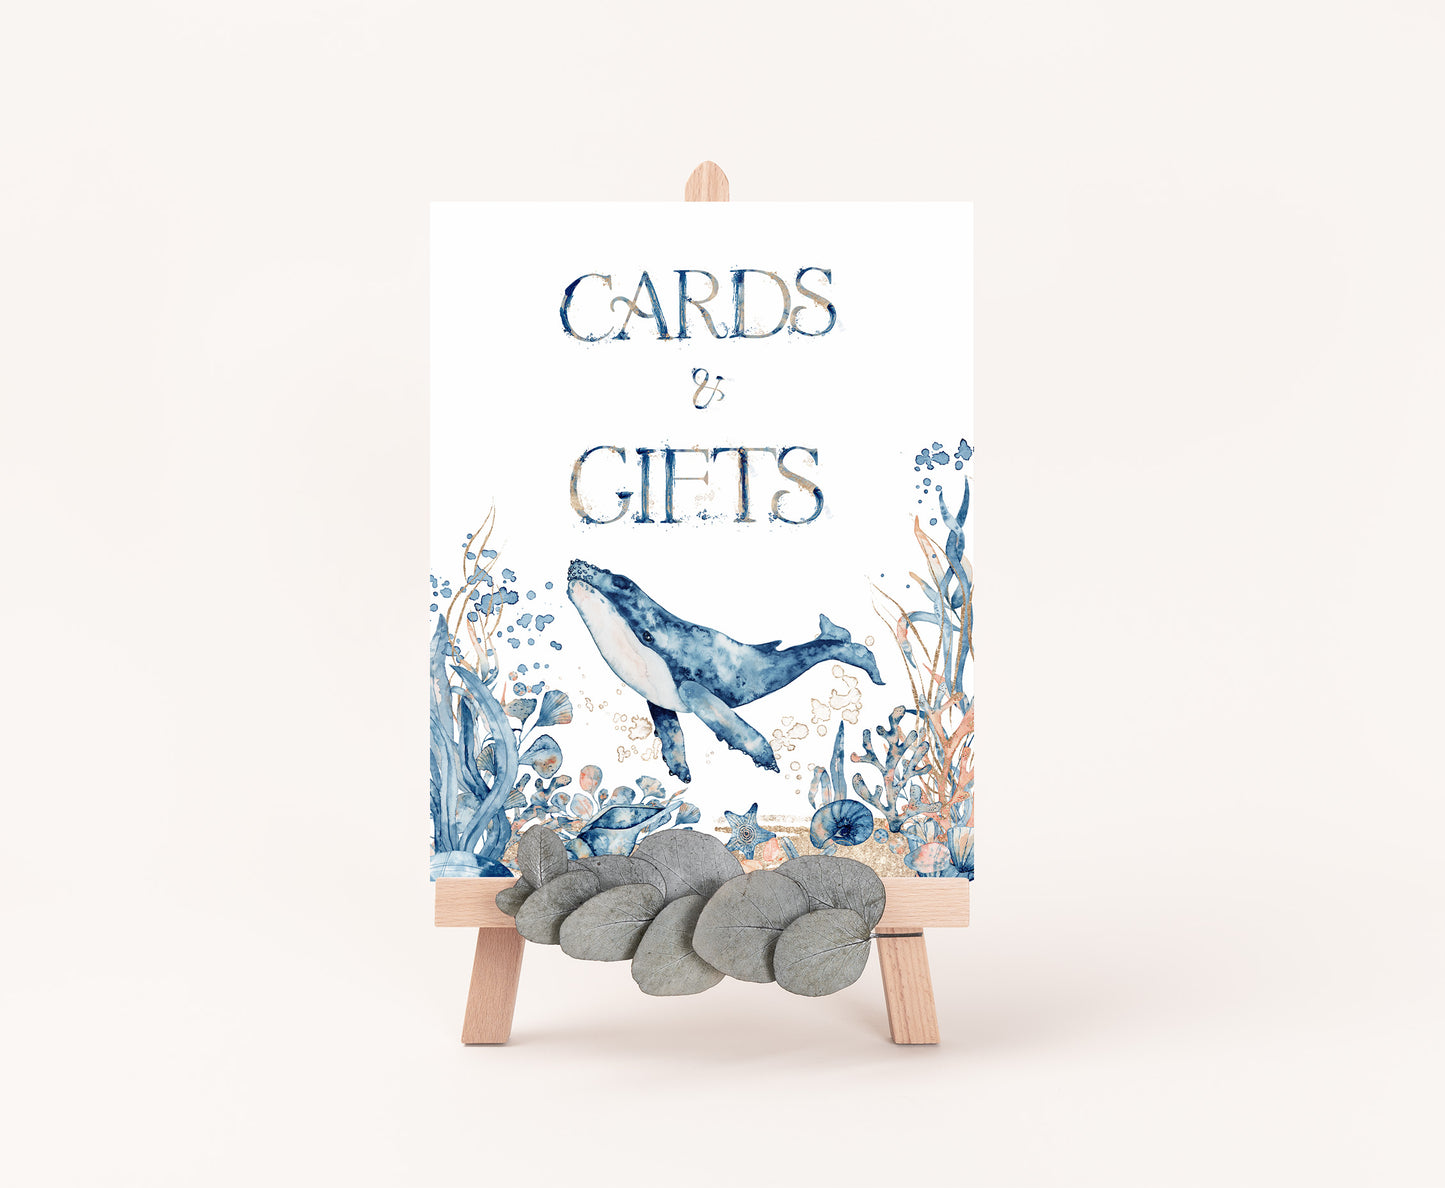 Whale Cards and gifts Sign | Under the sea Themed Party Table Decorations - 44C